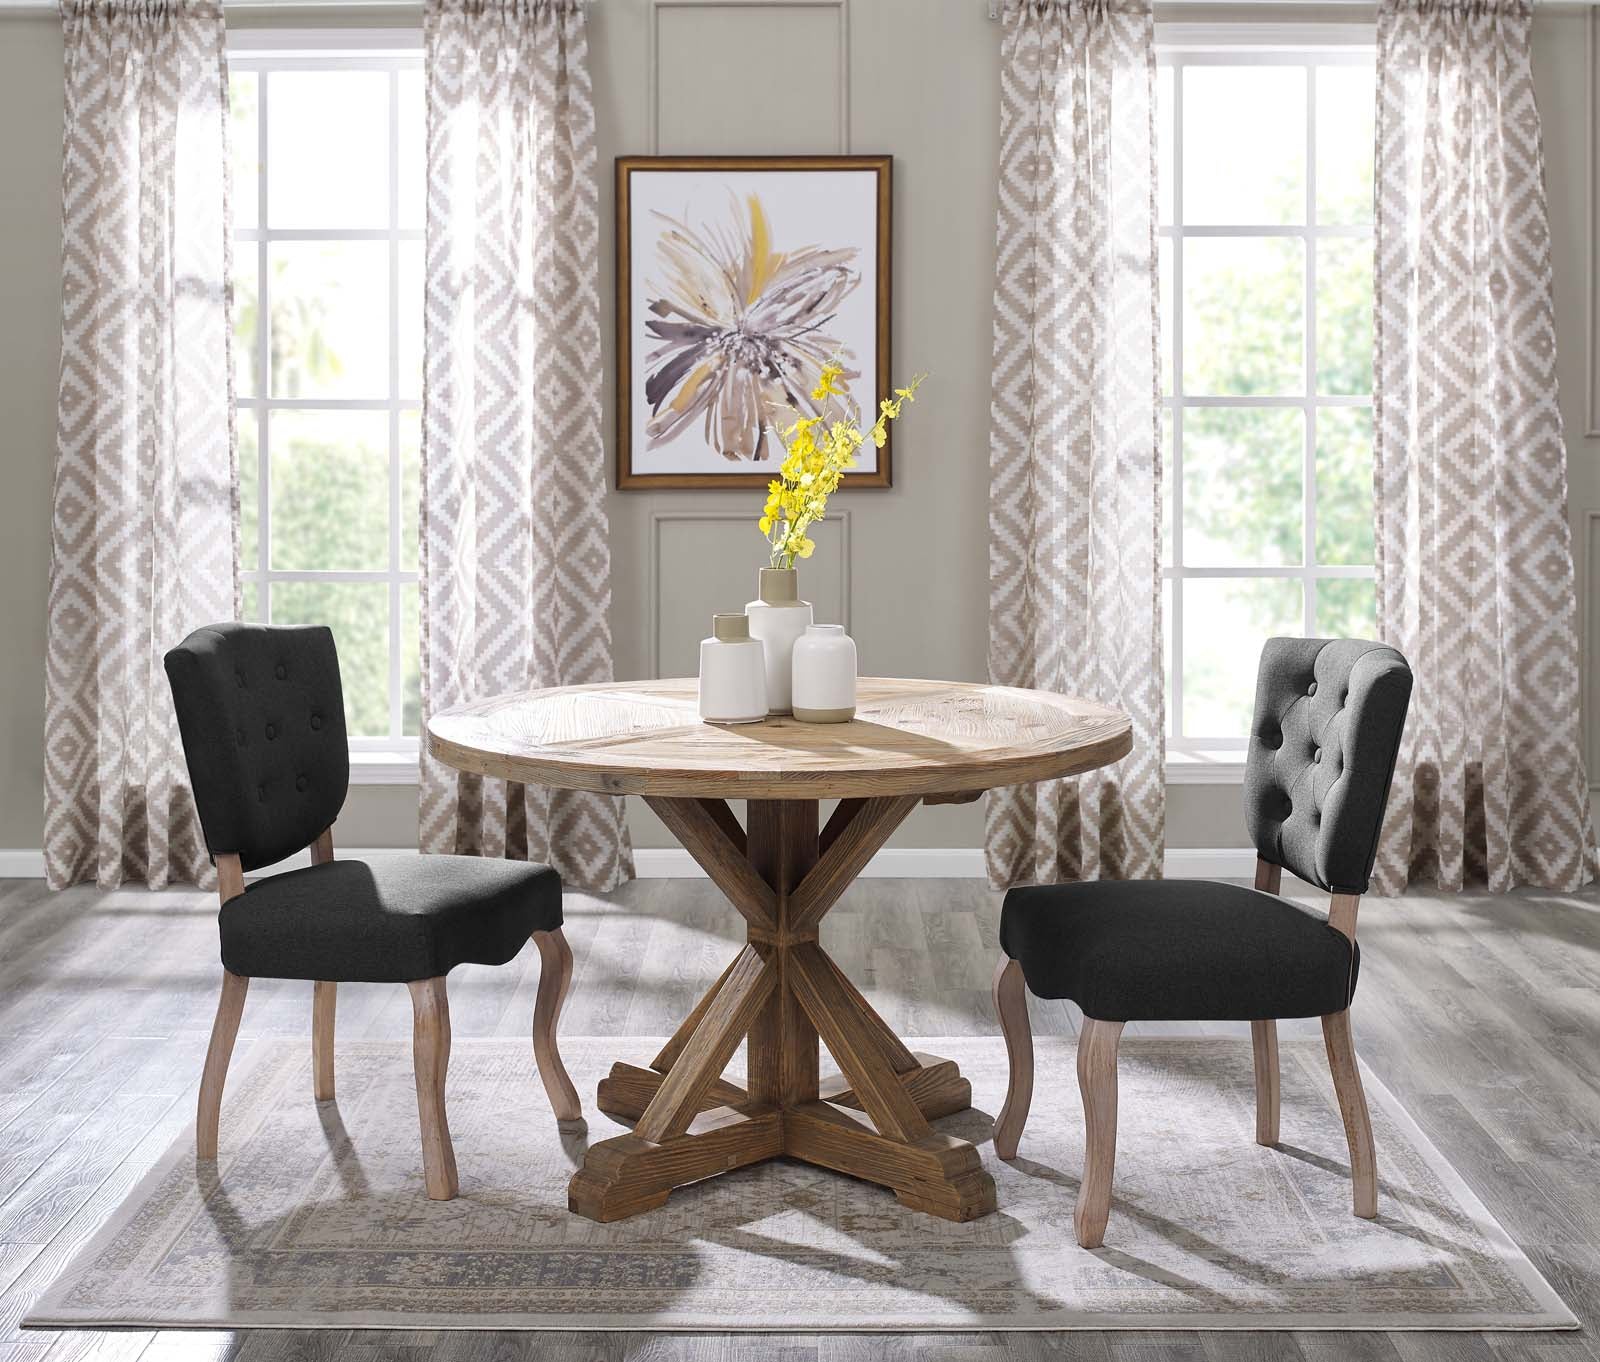 Stitch 47" Round Pine Wood Dining Table - East Shore Modern Home Furnishings